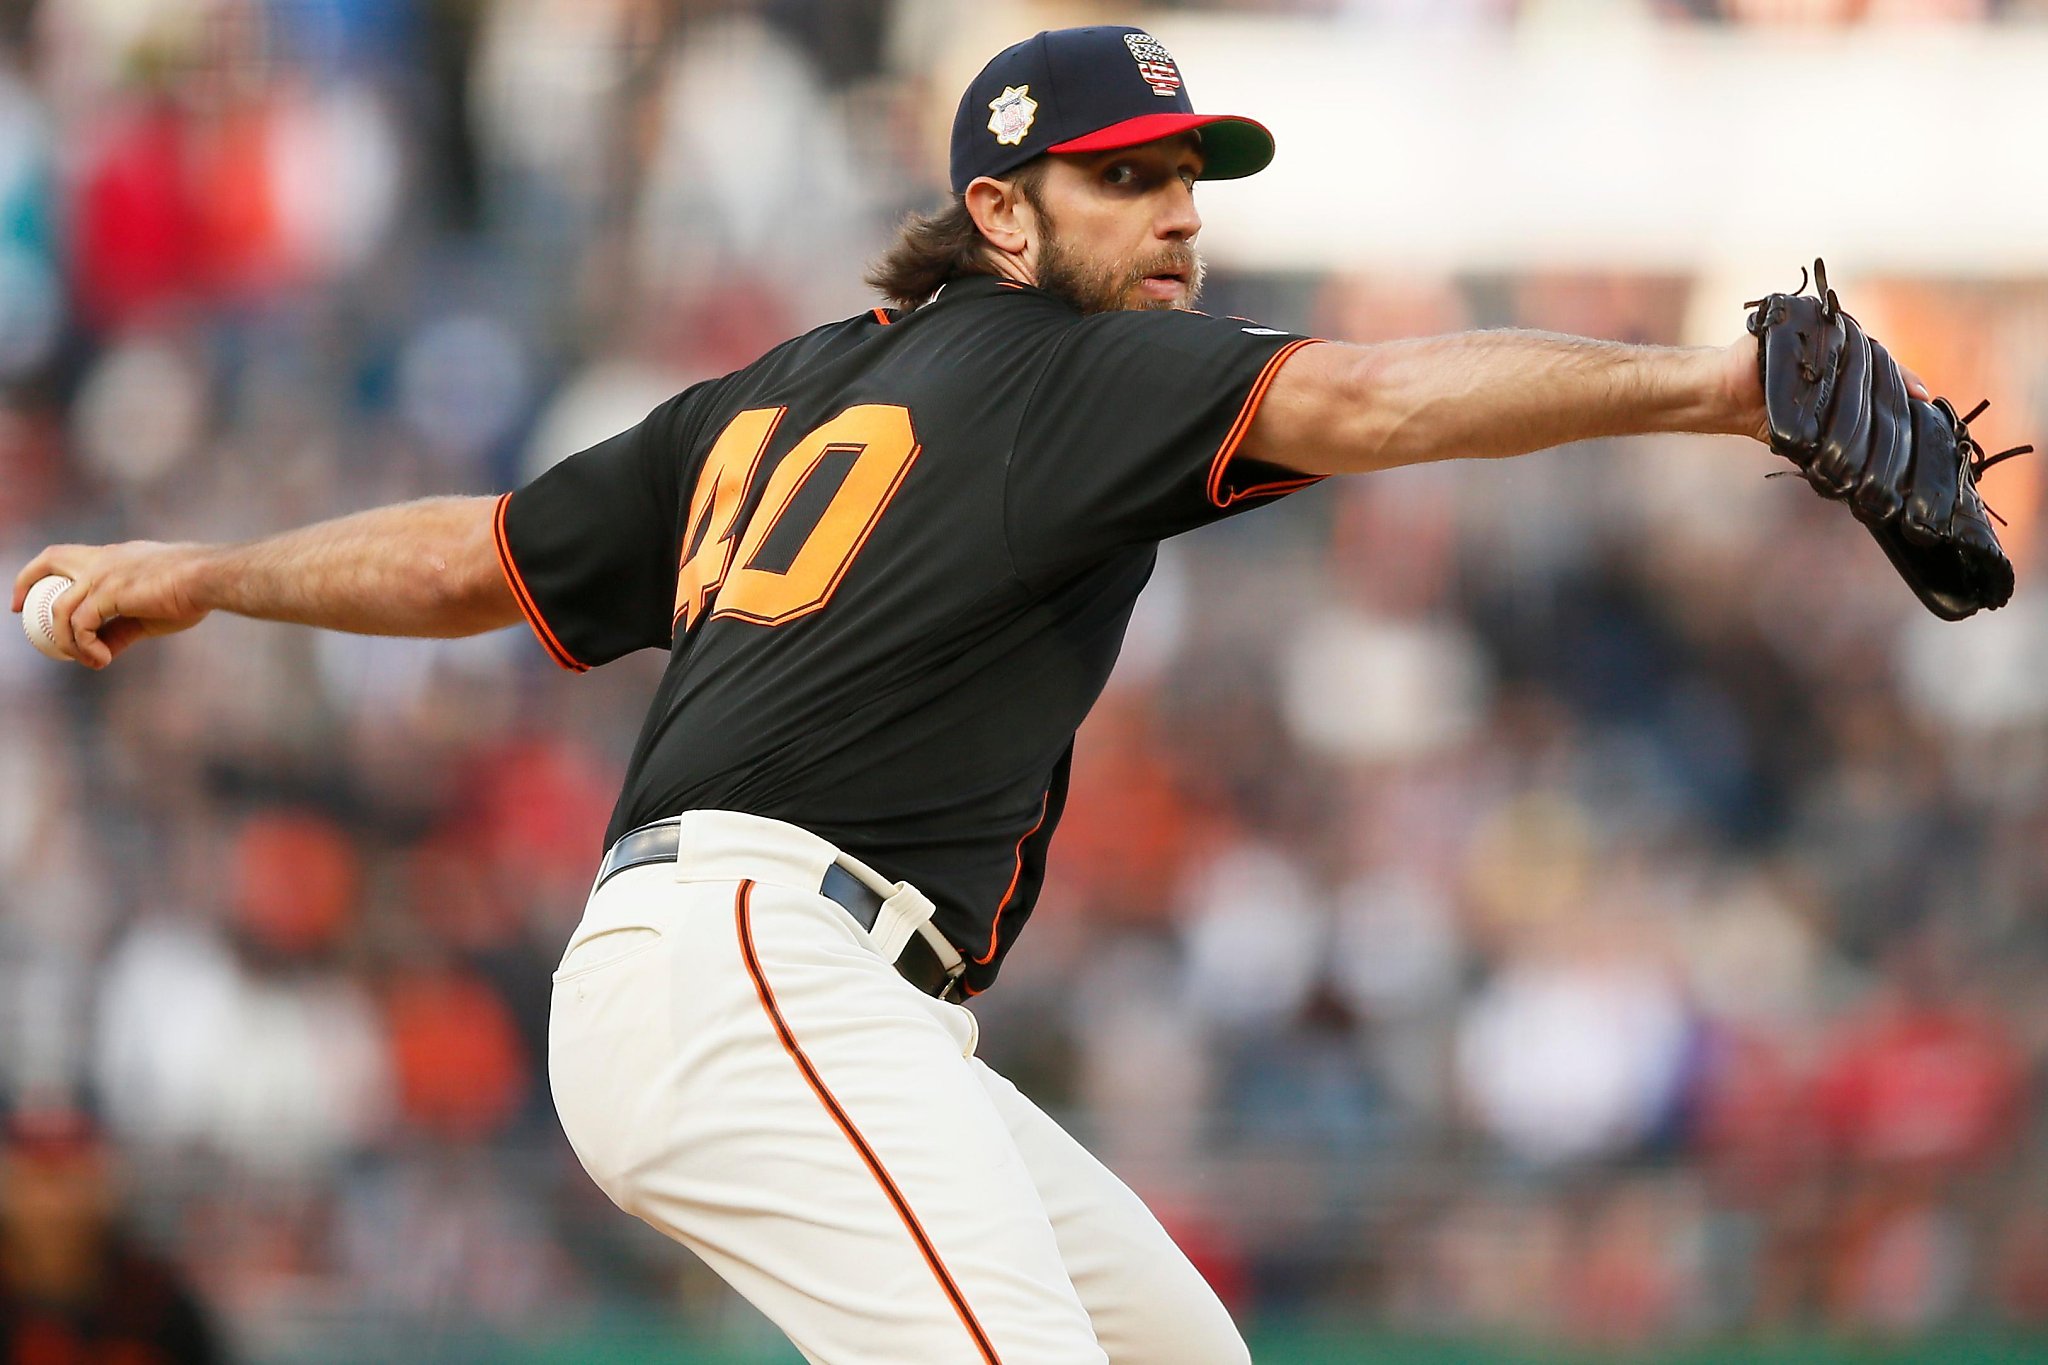 Could today's start be Madison Bumgarner's last with the Giants?